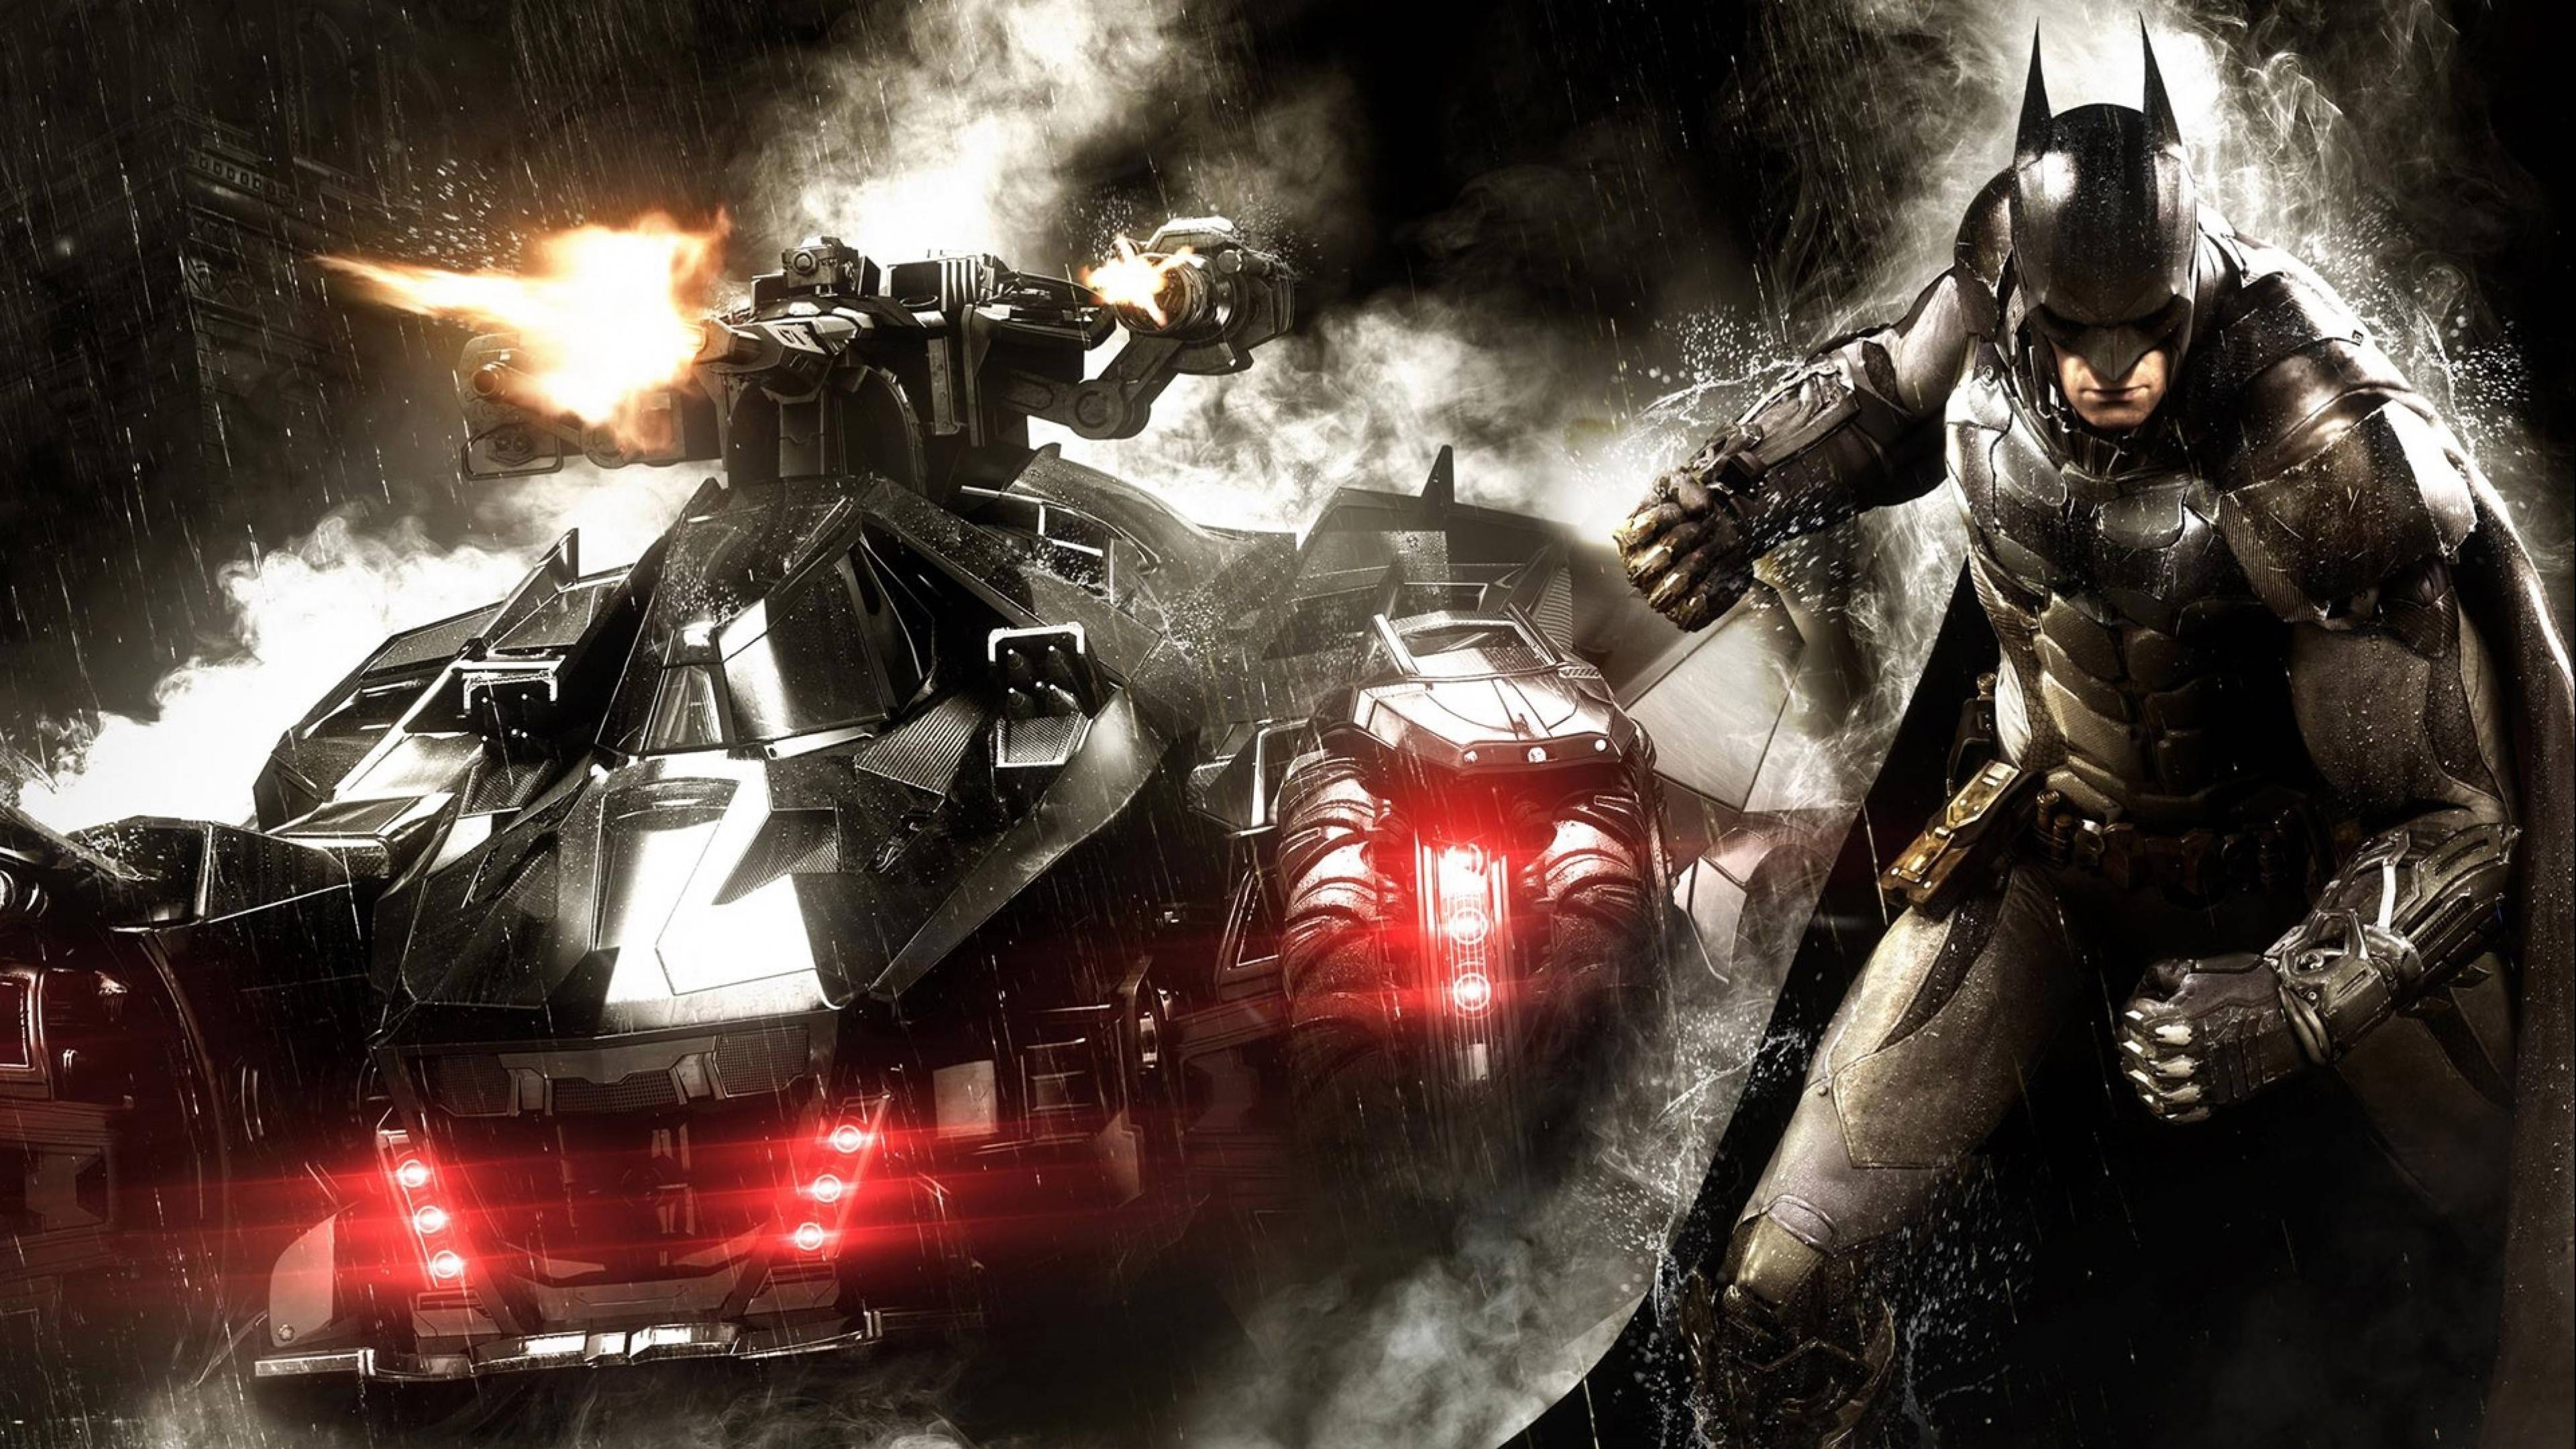 Batman Arkham Knight Hd Wallpapers For Mobile Phones And ...